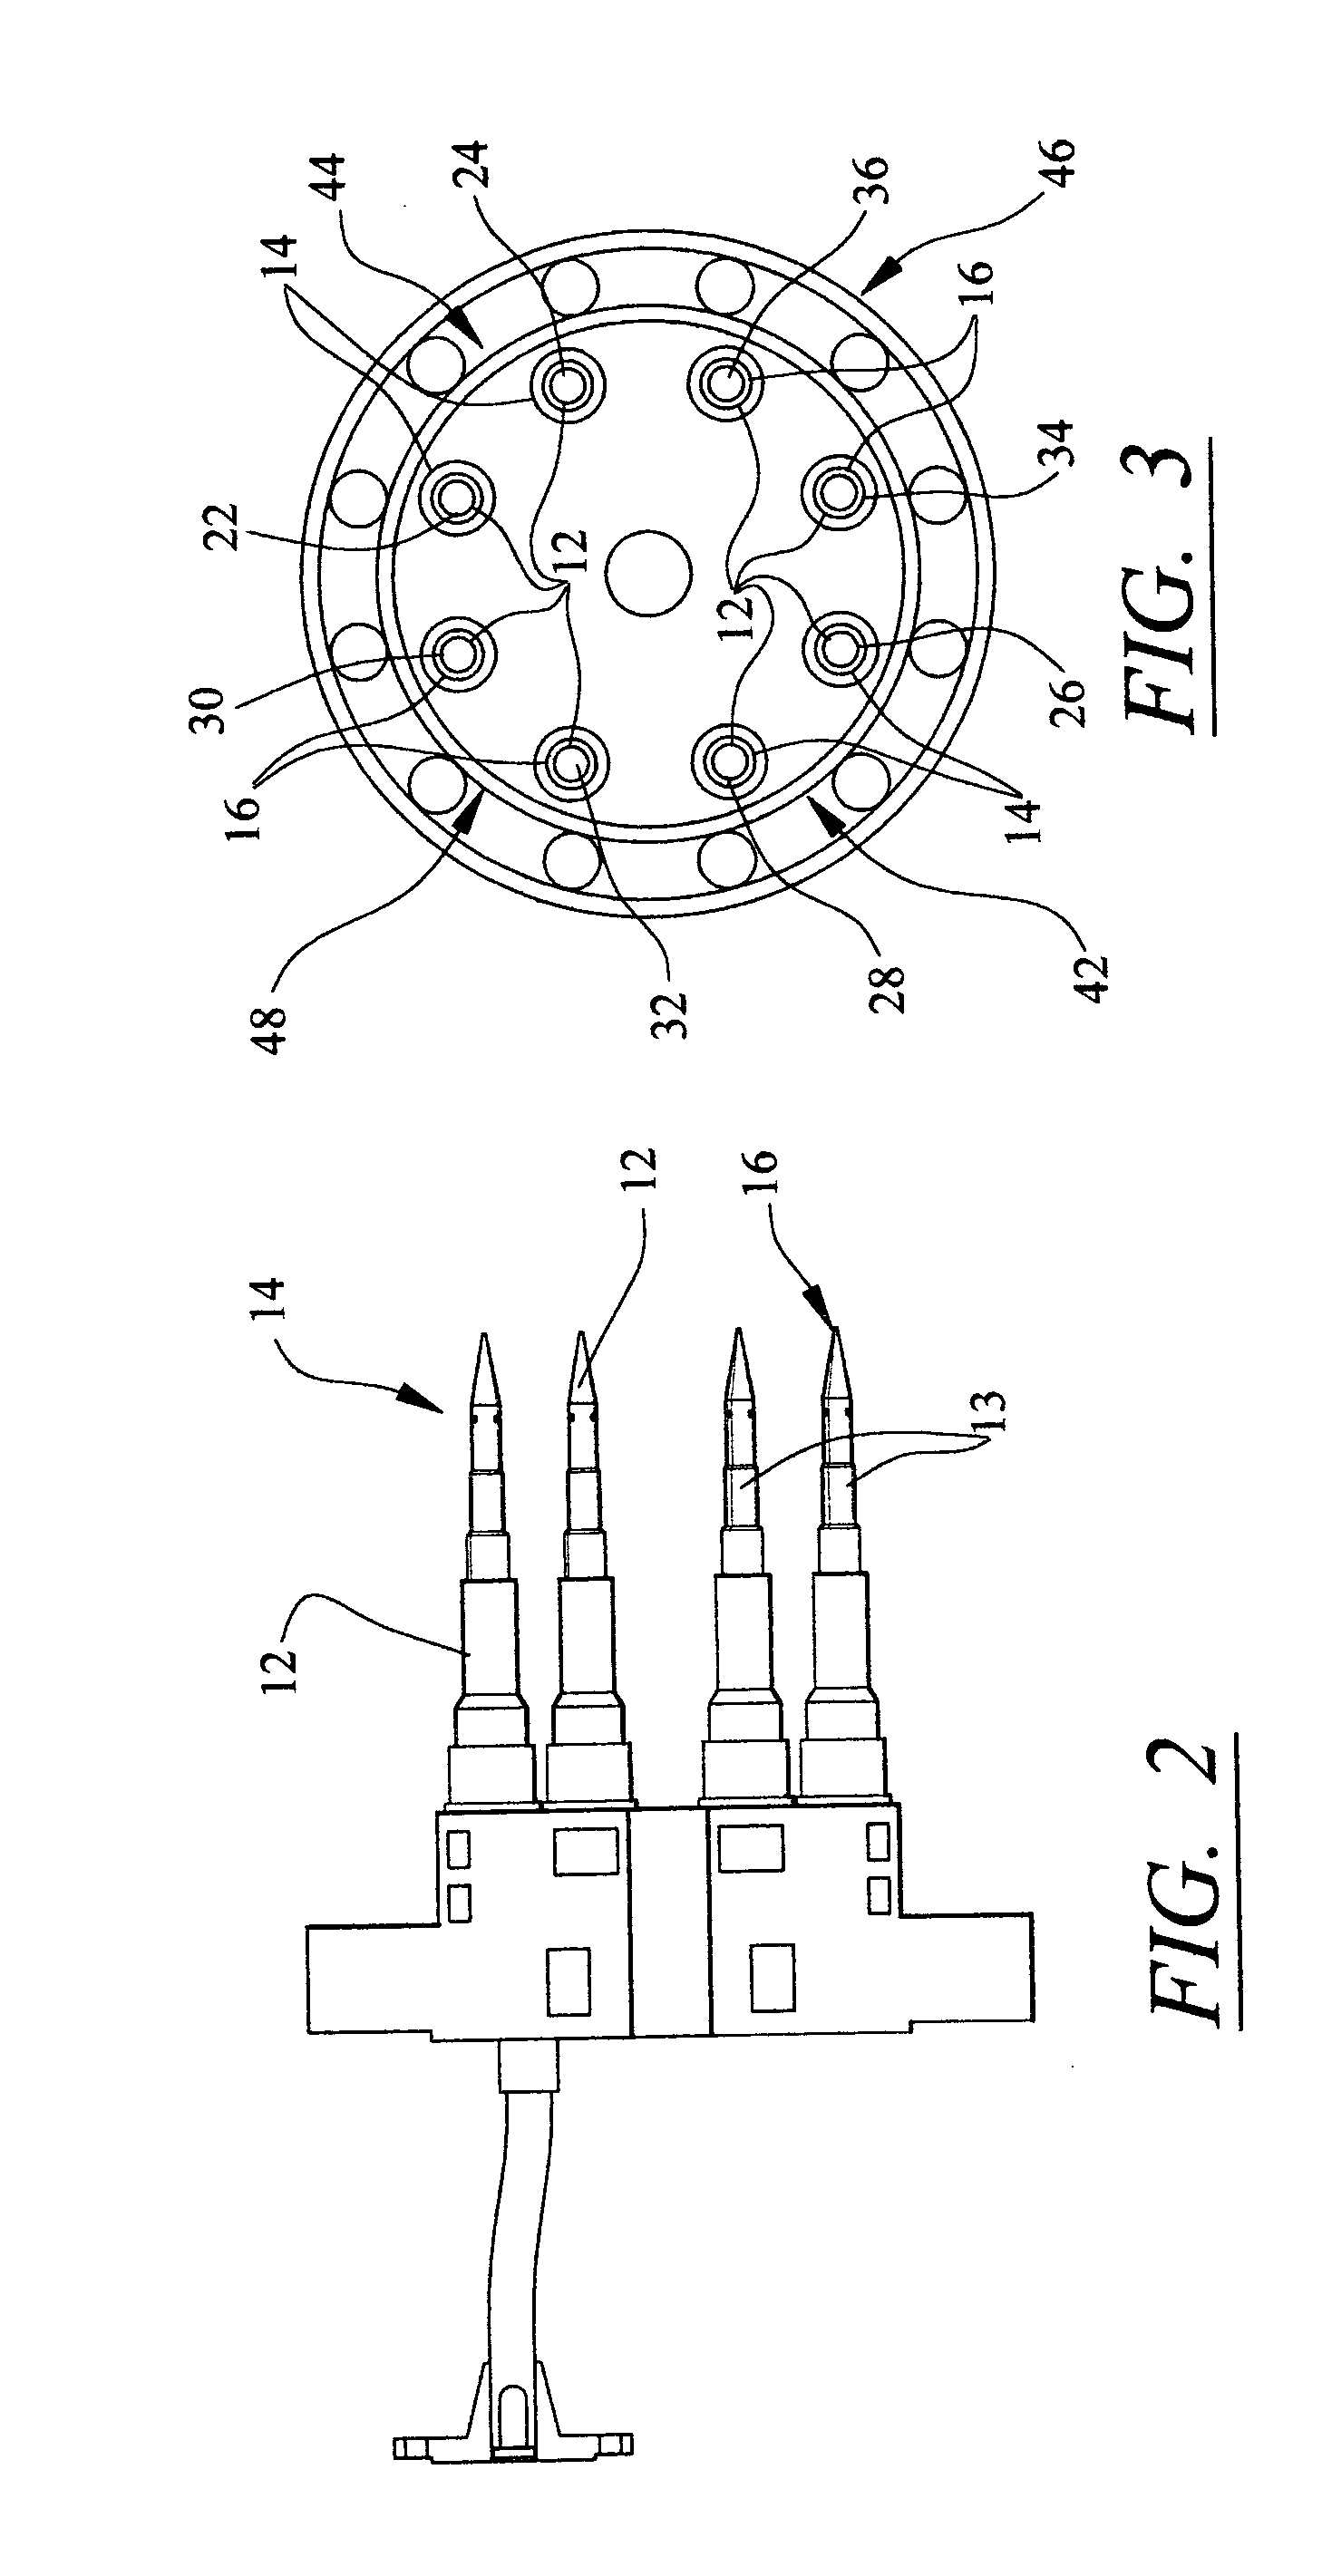 Fuel injection system for a turbine engine